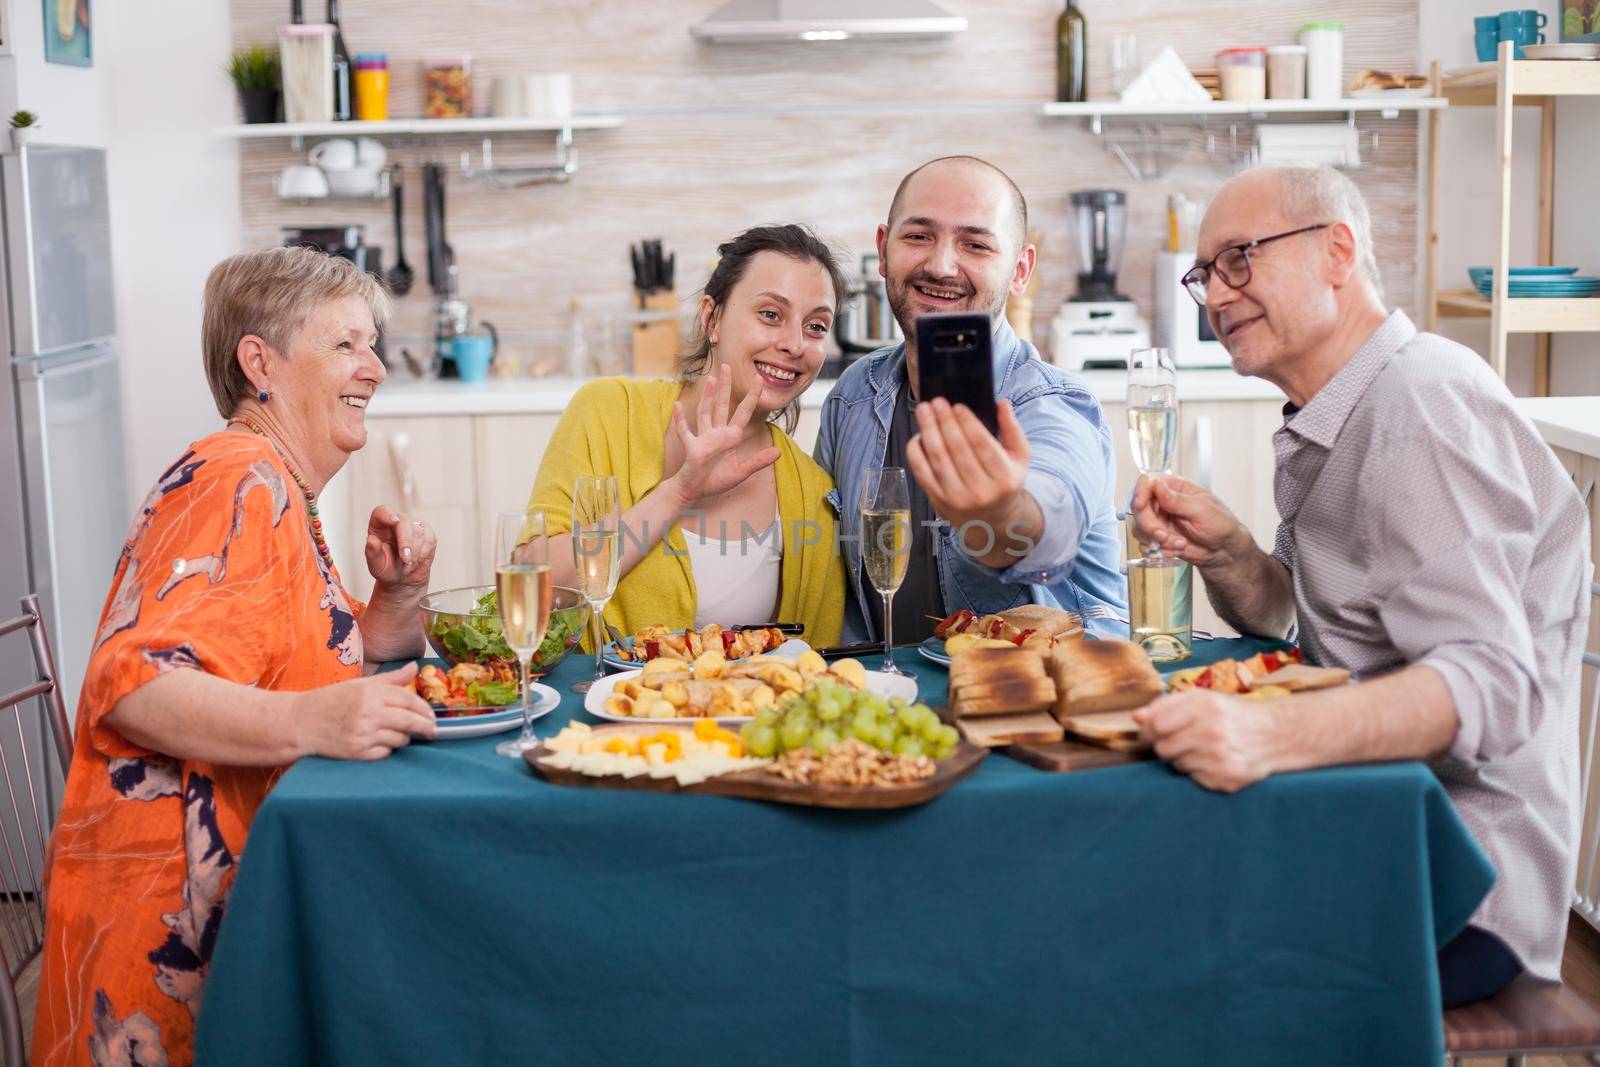 Cheerful family during video call while having delicious brunch in kitchen at dining table. Parents bonding with son and his wife.